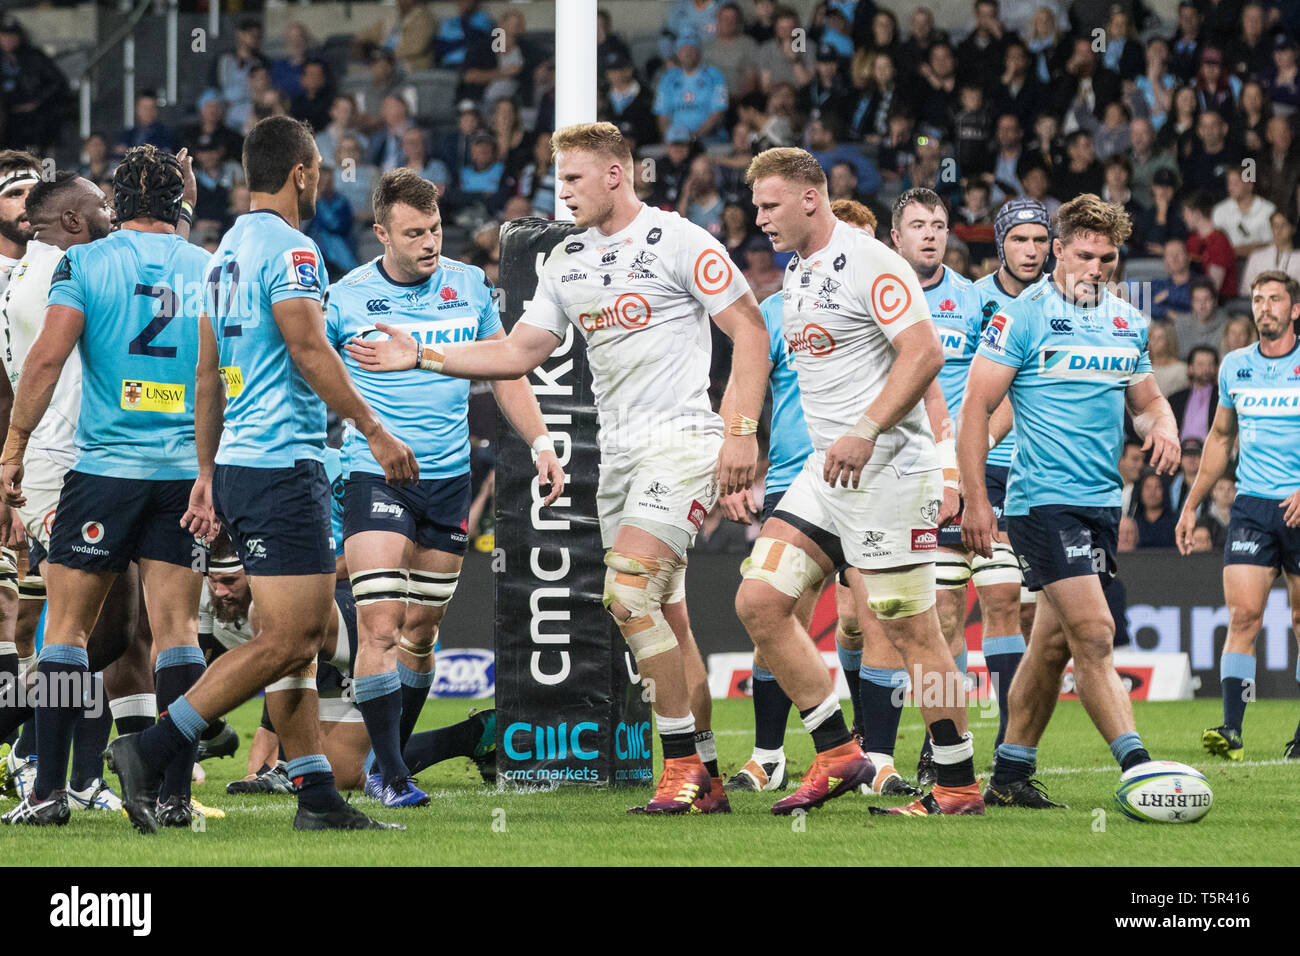 Sydney, Australia. 27th Apr, 2019. Daniel du Preez of Cell C Sharks  celebrates scoring a try during the Super Rugby match between Waratahs and  Sharks at Bankwest Stadium, Sydney, Australia on 27